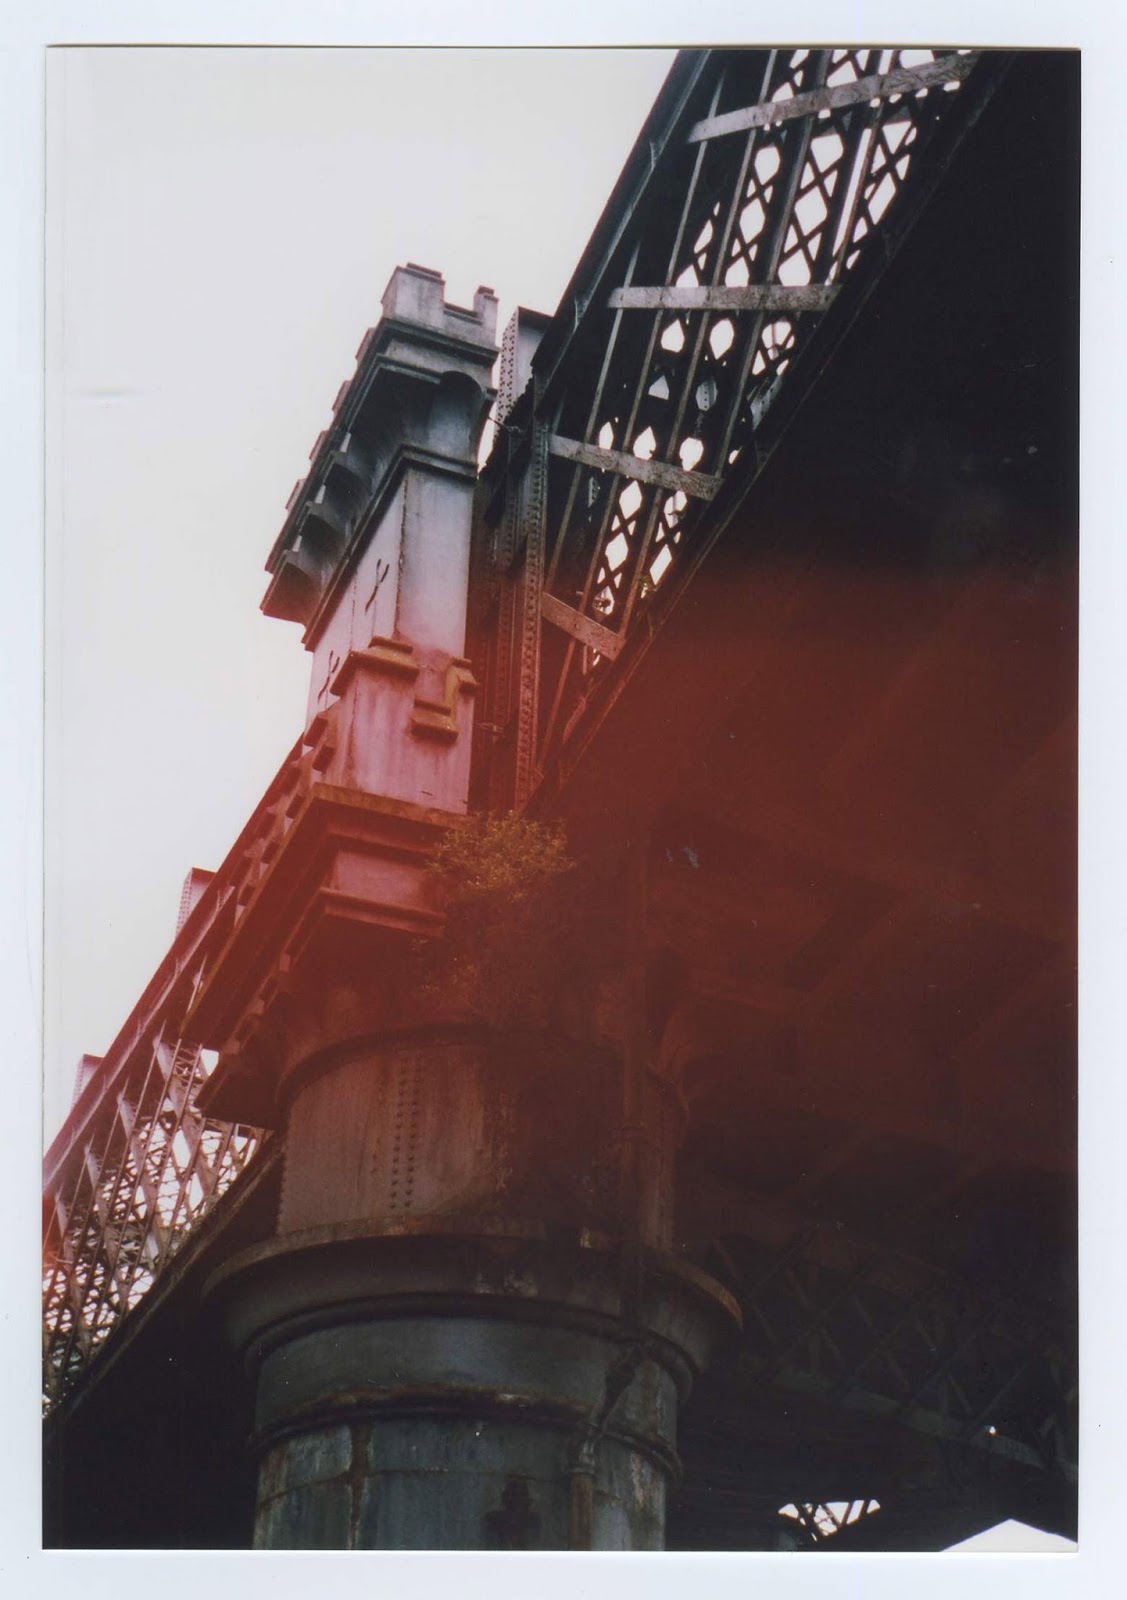 Photography, Lomography, light leaks, film, analog, analogue, 35mm, 120mm, pentax k1000, expired film, manchester, explore, urbex, history, diana, black and white, vintage, hipster, indie, instagram, no filter, experiments, old school, negatives, printing, travel, budapest, wales, pug